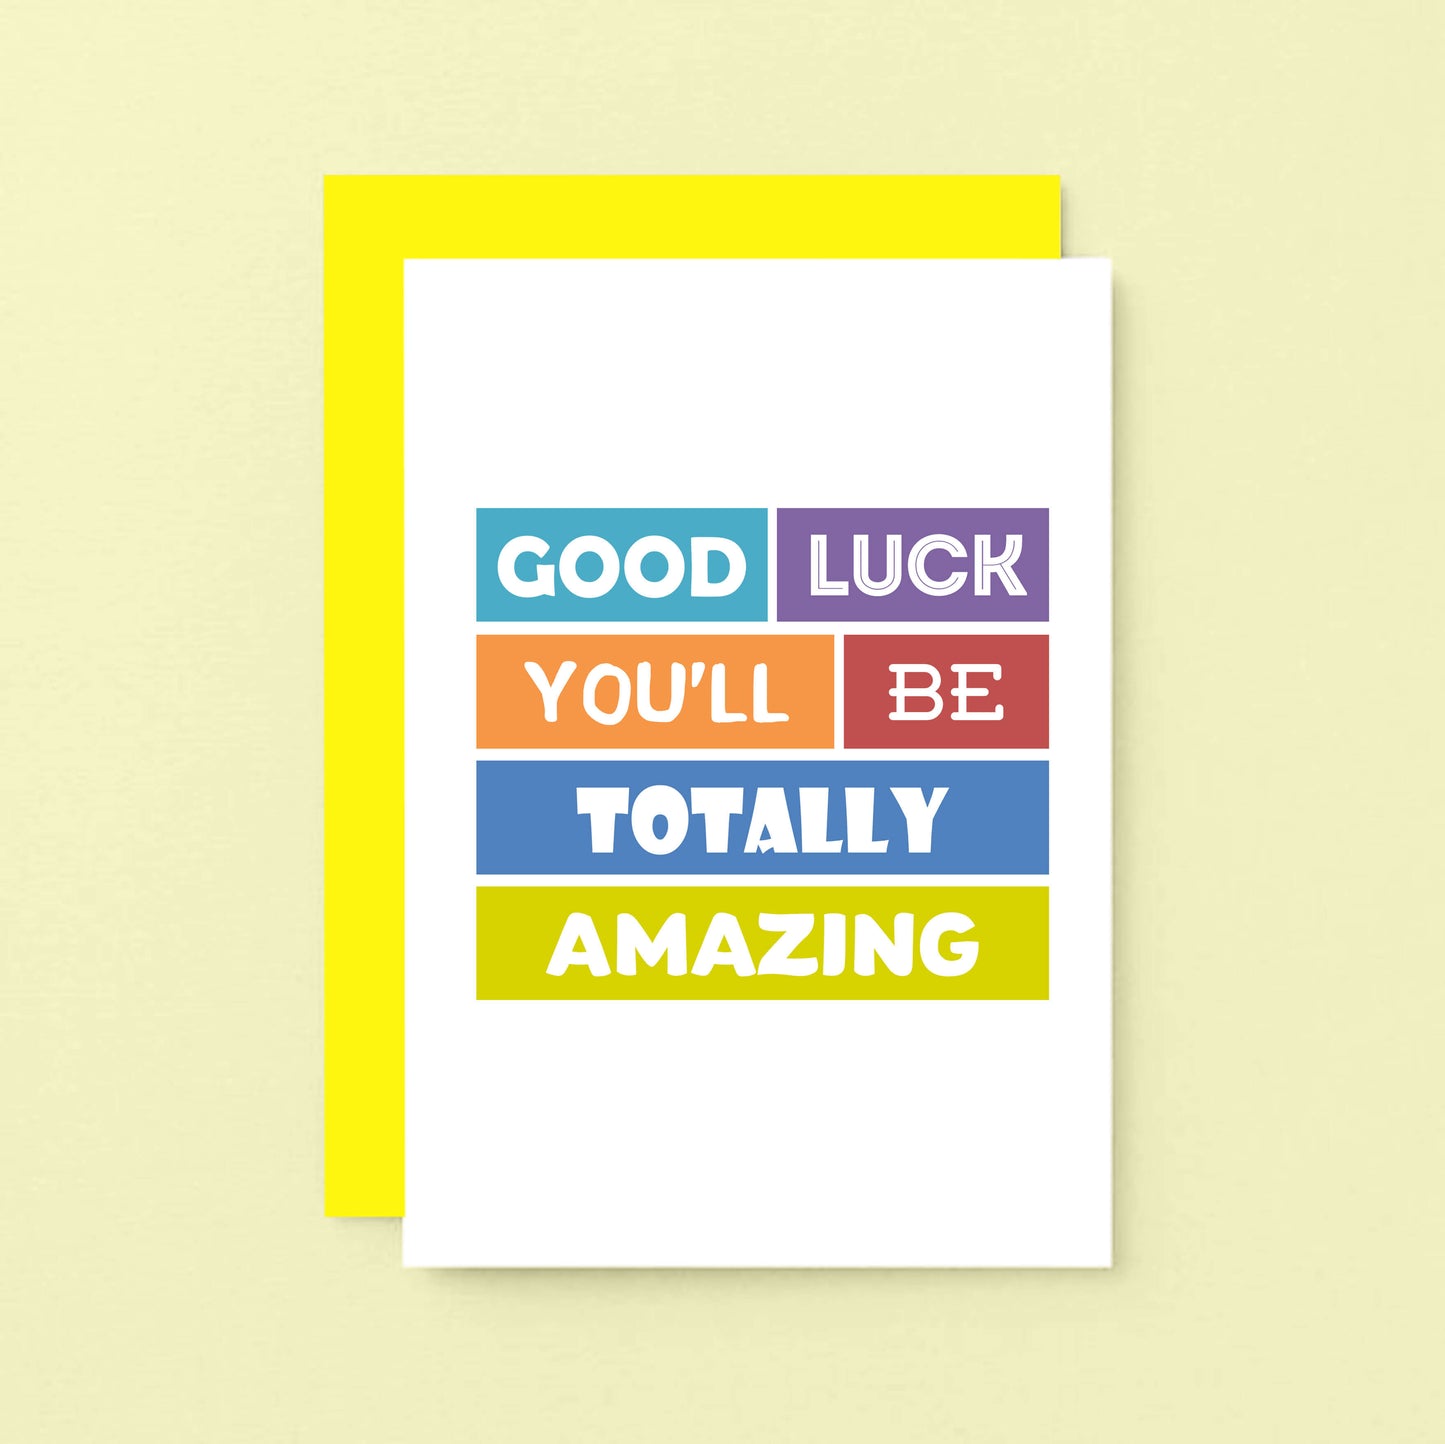 Totally Amazing Good Luck Card by SixElevenCreations. Reads Good luck you'll be totally amazing. Product code SE0018A6